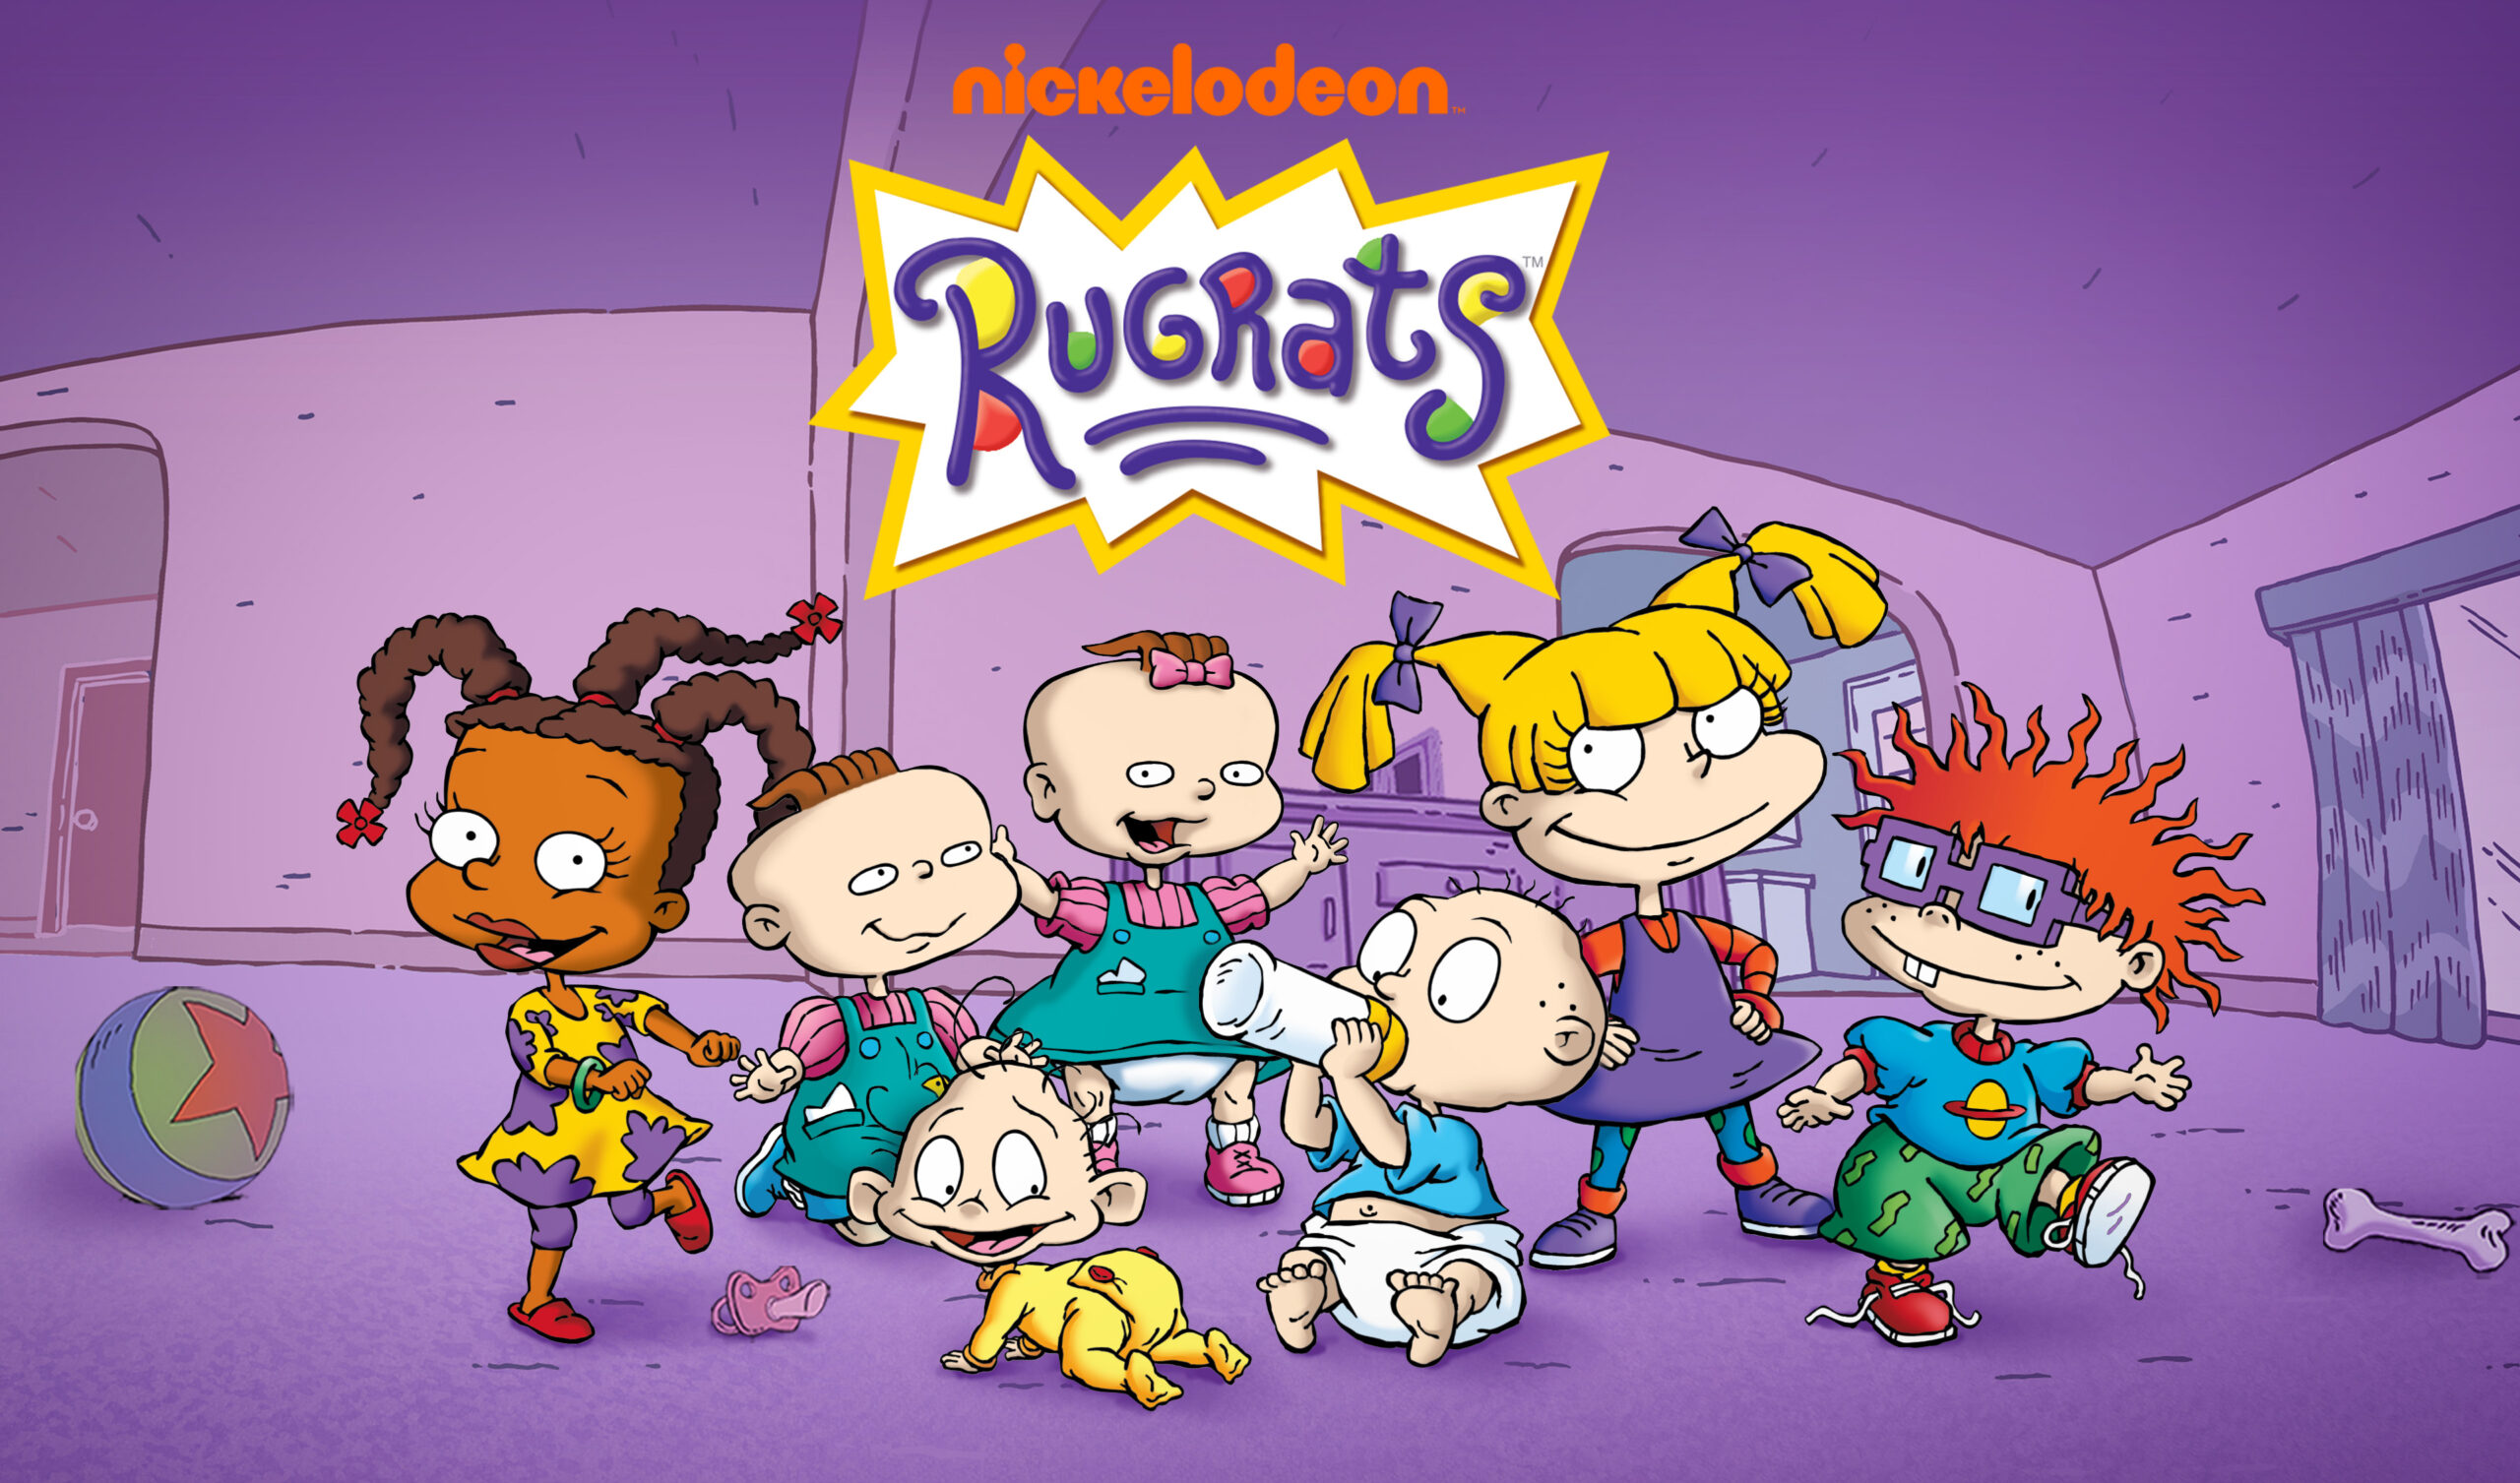 Pluto TV’s New 90s Kids Channel is Now Live Streaming Rugrats, Hey Arnold!, Kenan & Kel, Doug, & Rocko’s Modern Life